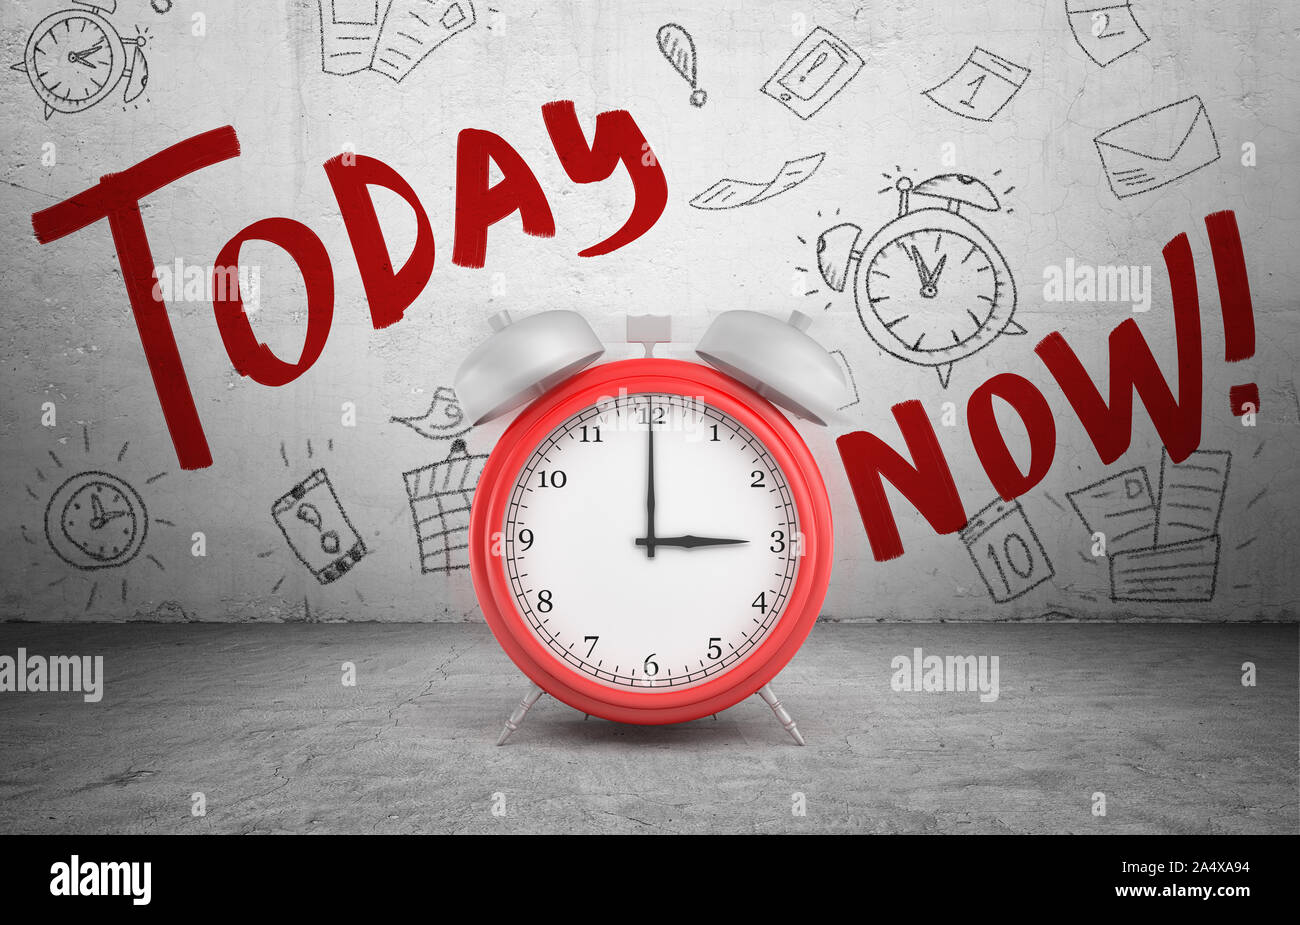 3d rendering of a large red ringing alarm clock stands on concrete background with words Today and Now. Stock Photo